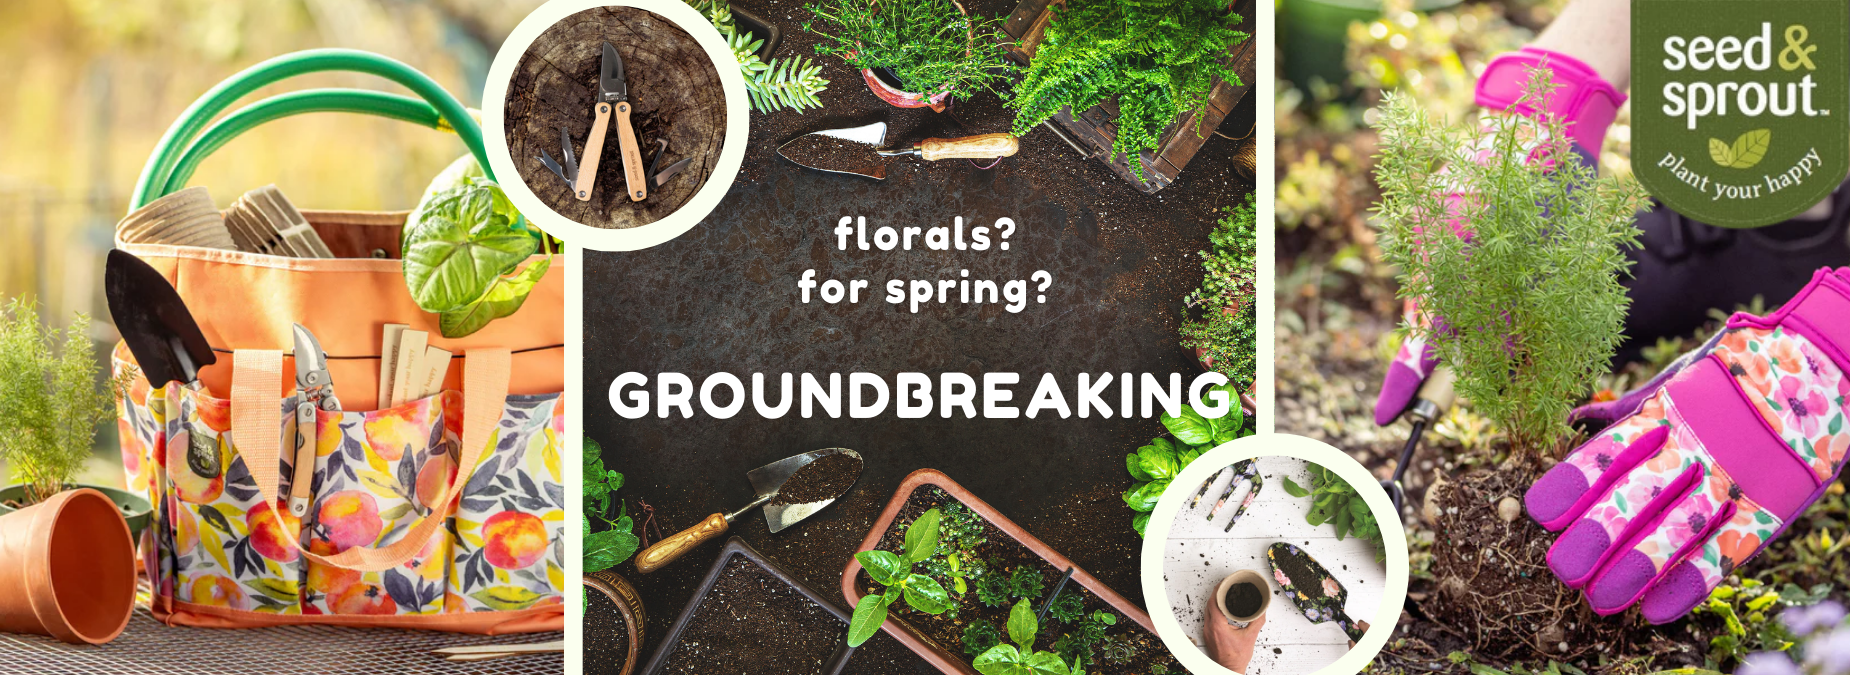 Seed & Sprout - florals? for spring? groundbreaking